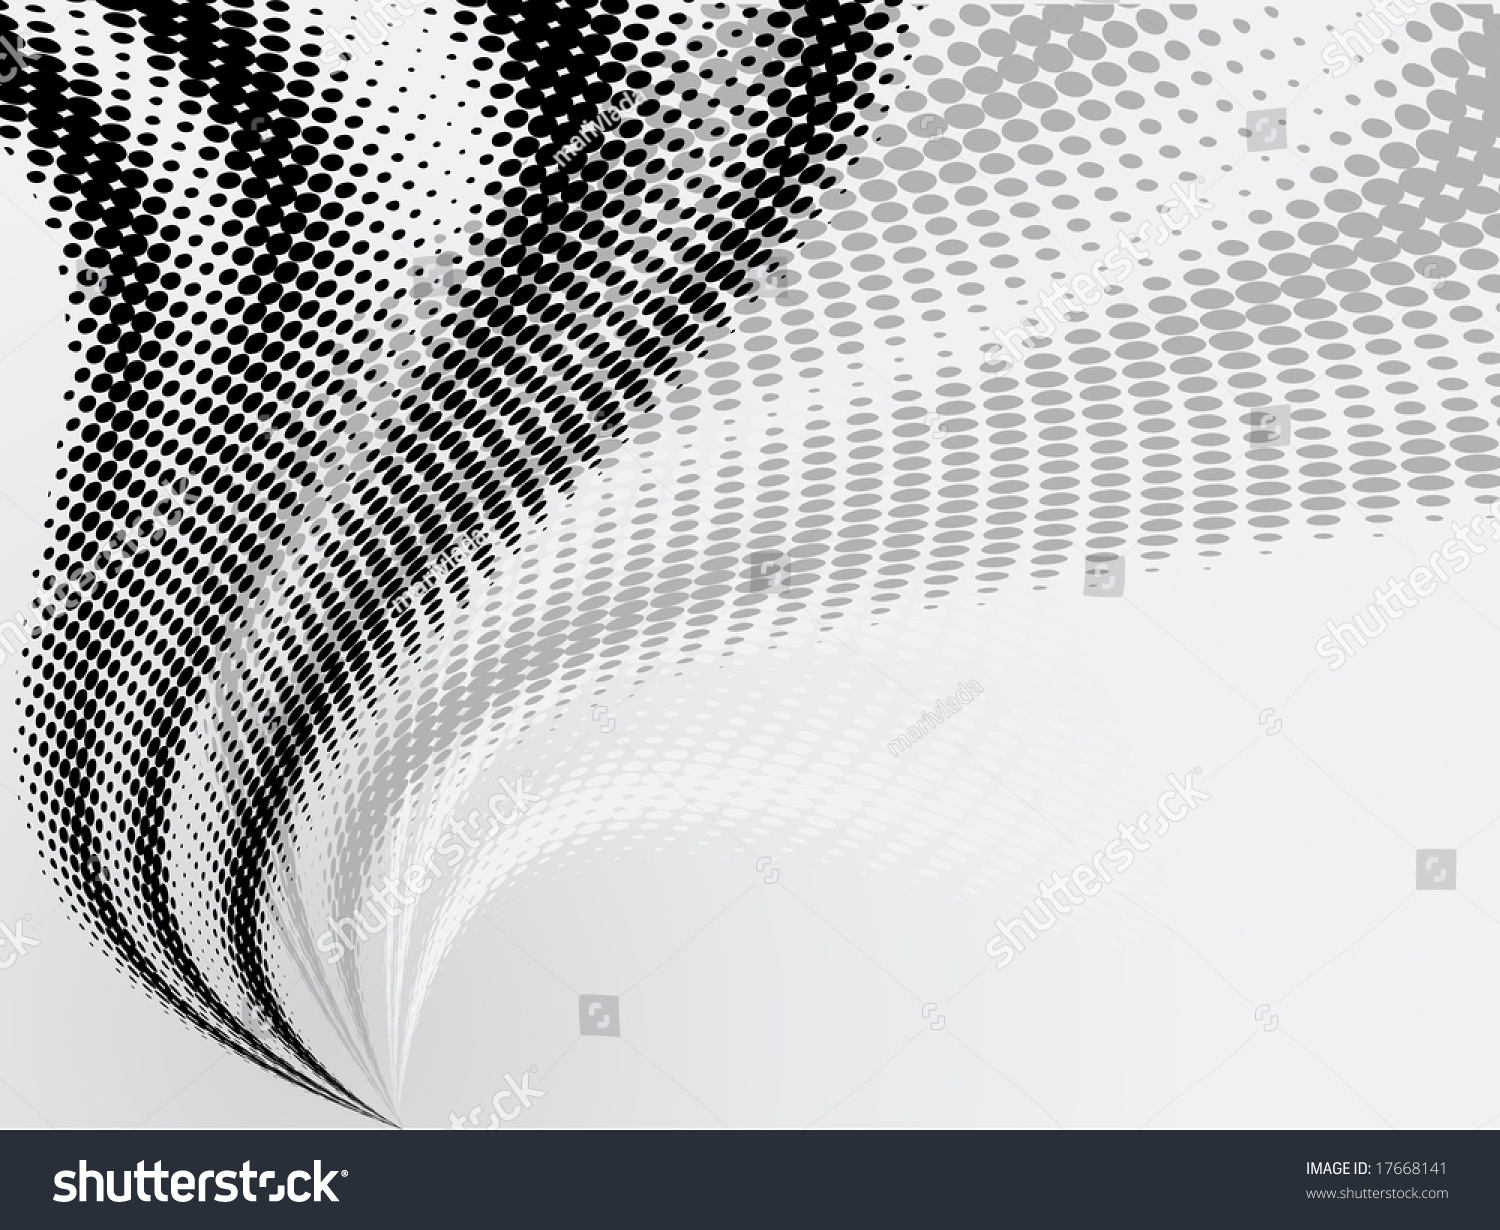 Abstract Doted Wavy Background With Half Tone Effect Stock Vector ...